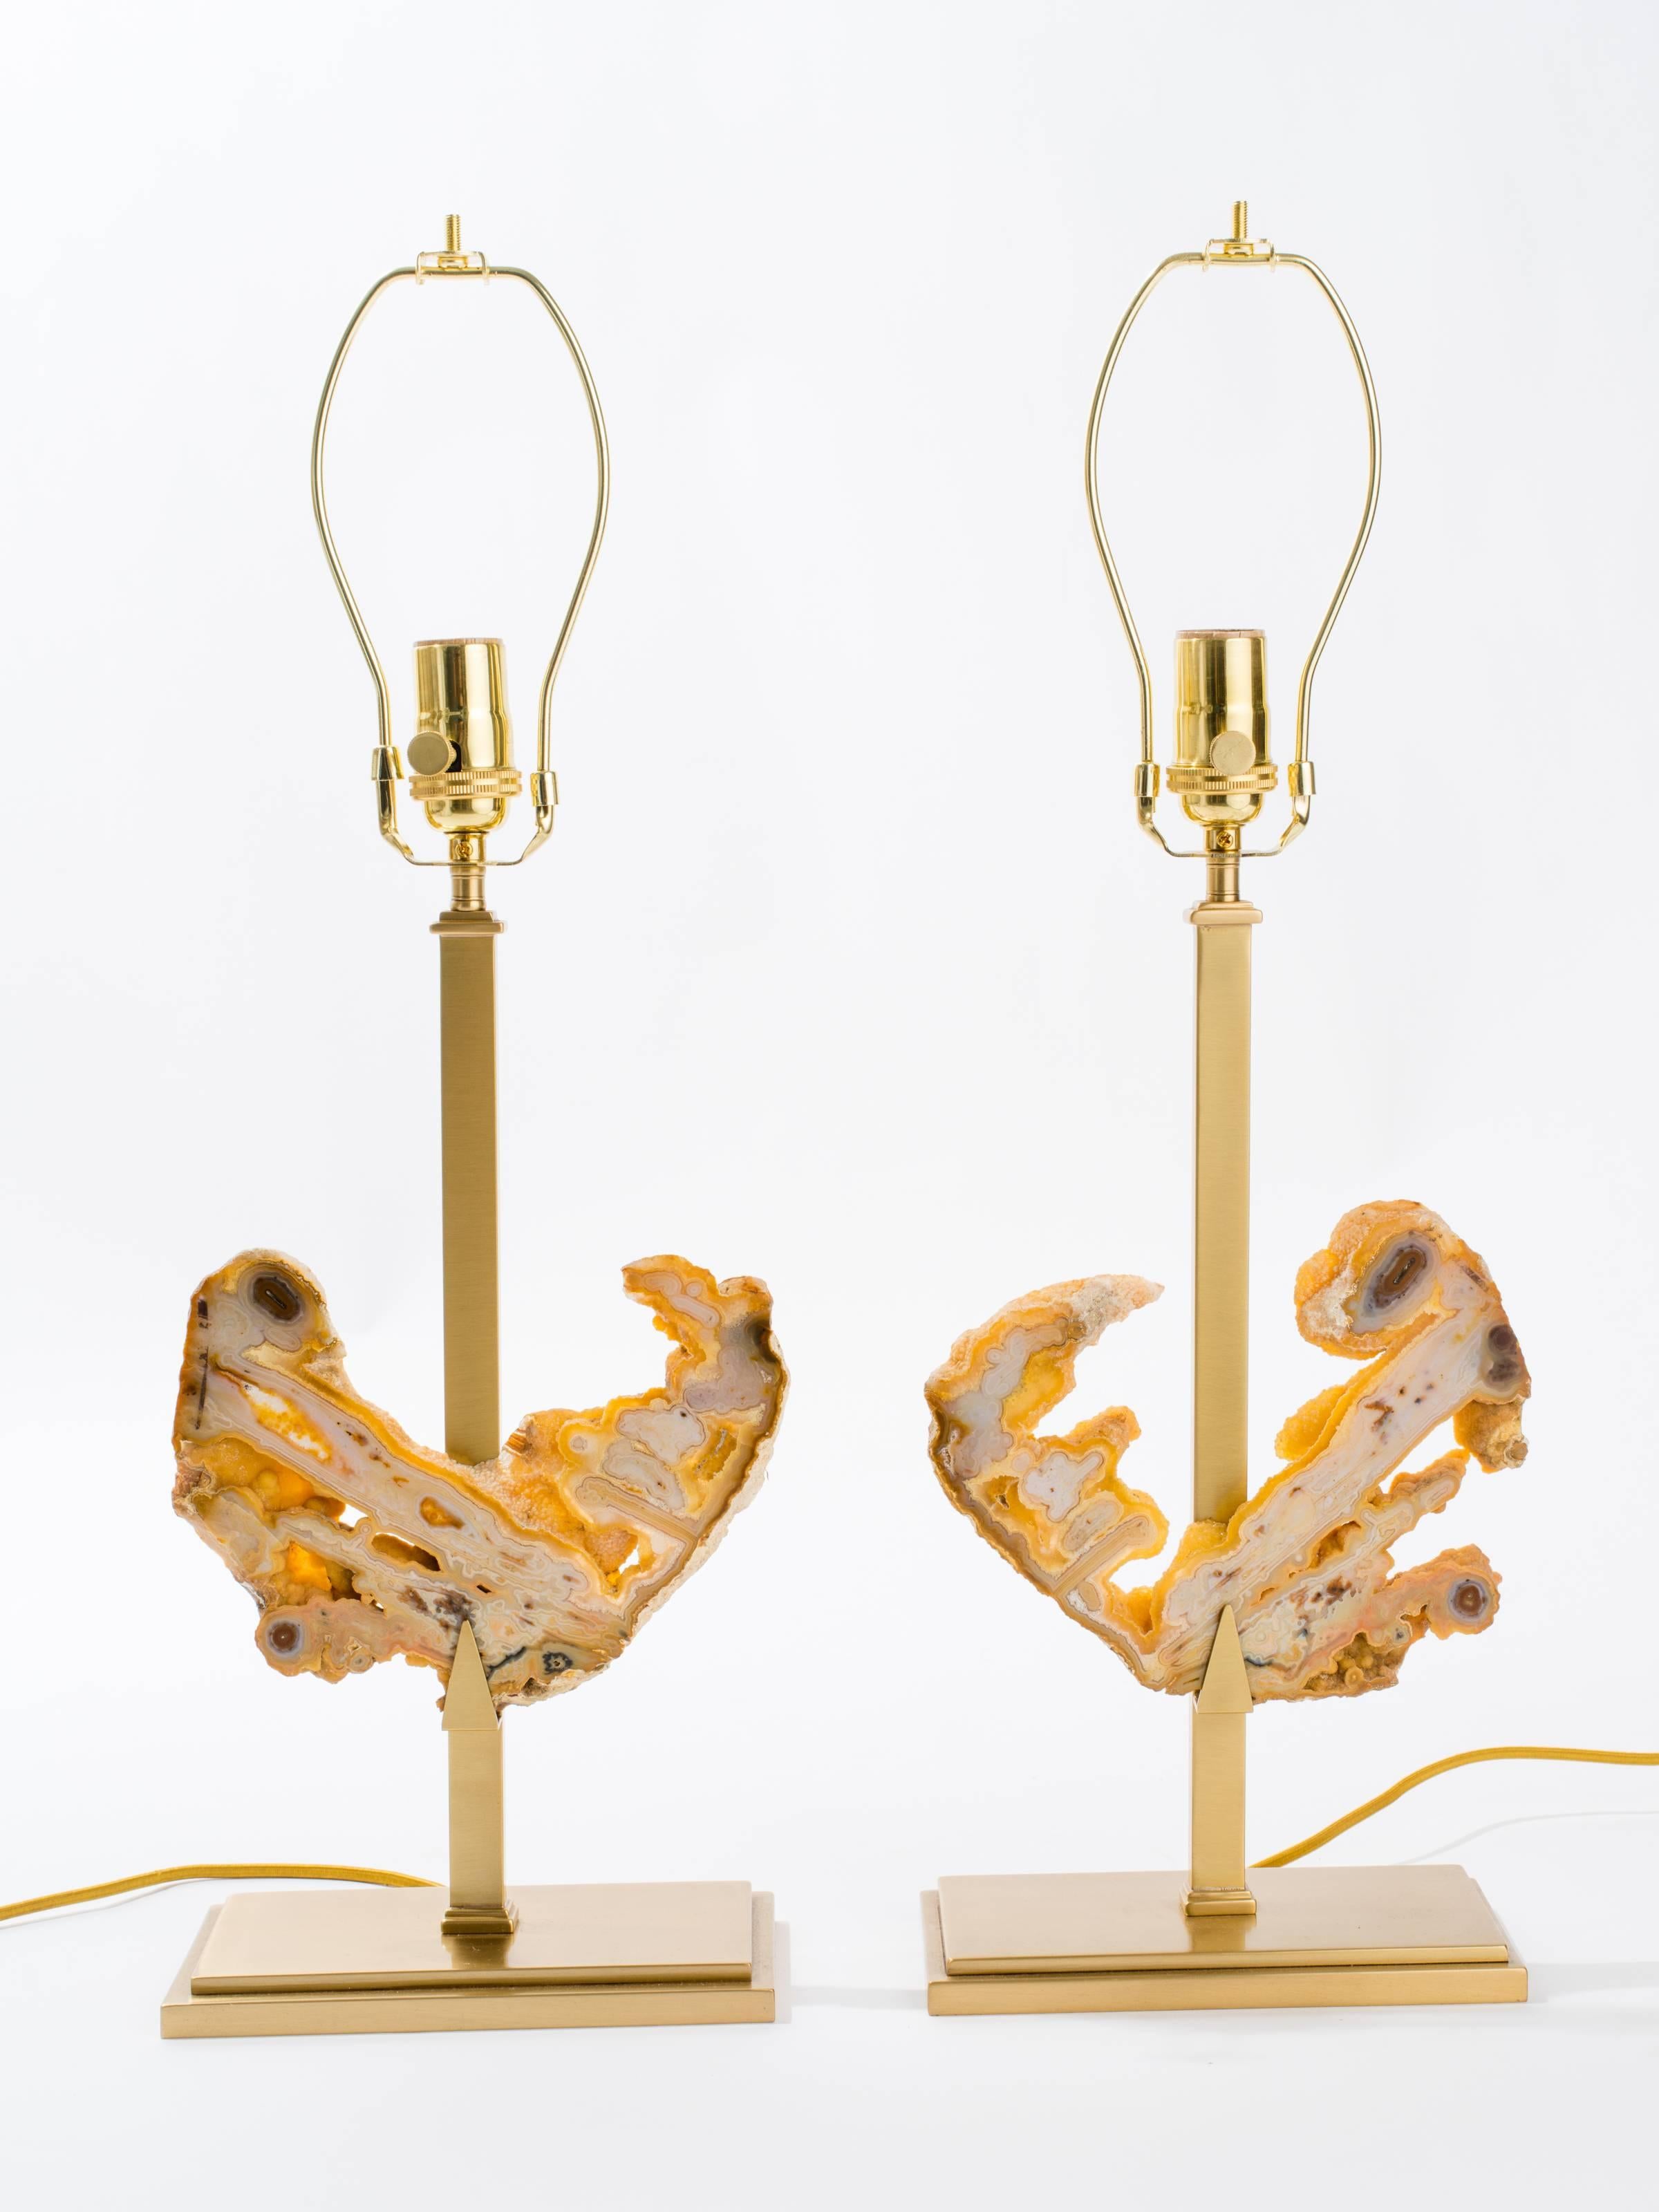 This is a unique pair of Agate table lamps.
Gemstones were hand picked among many specimens.
Custom-made by the artist these solid brass bases were designed specifically to display these beautiful stones.
Agate is one of the oldest jewelry and